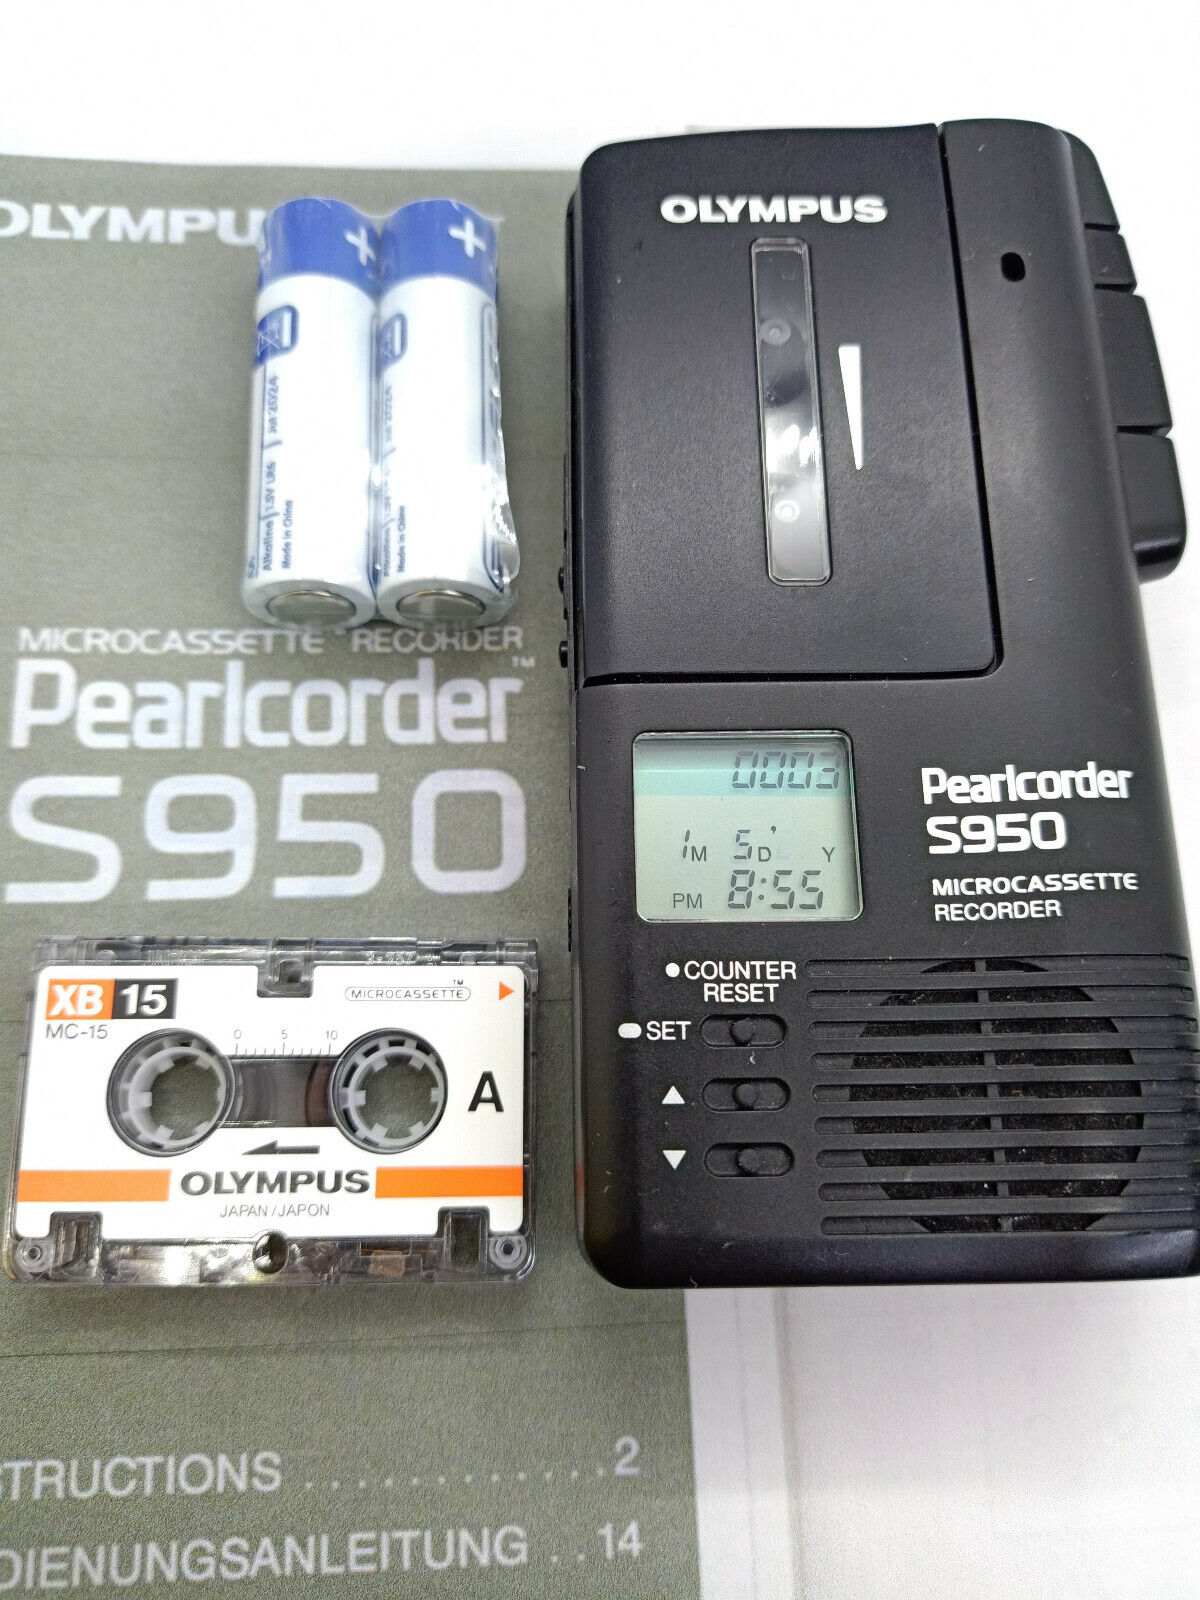 Recommendation Olympus Popular S950 MicroCassette Pearlcorder Dictaphone Voice Recorder